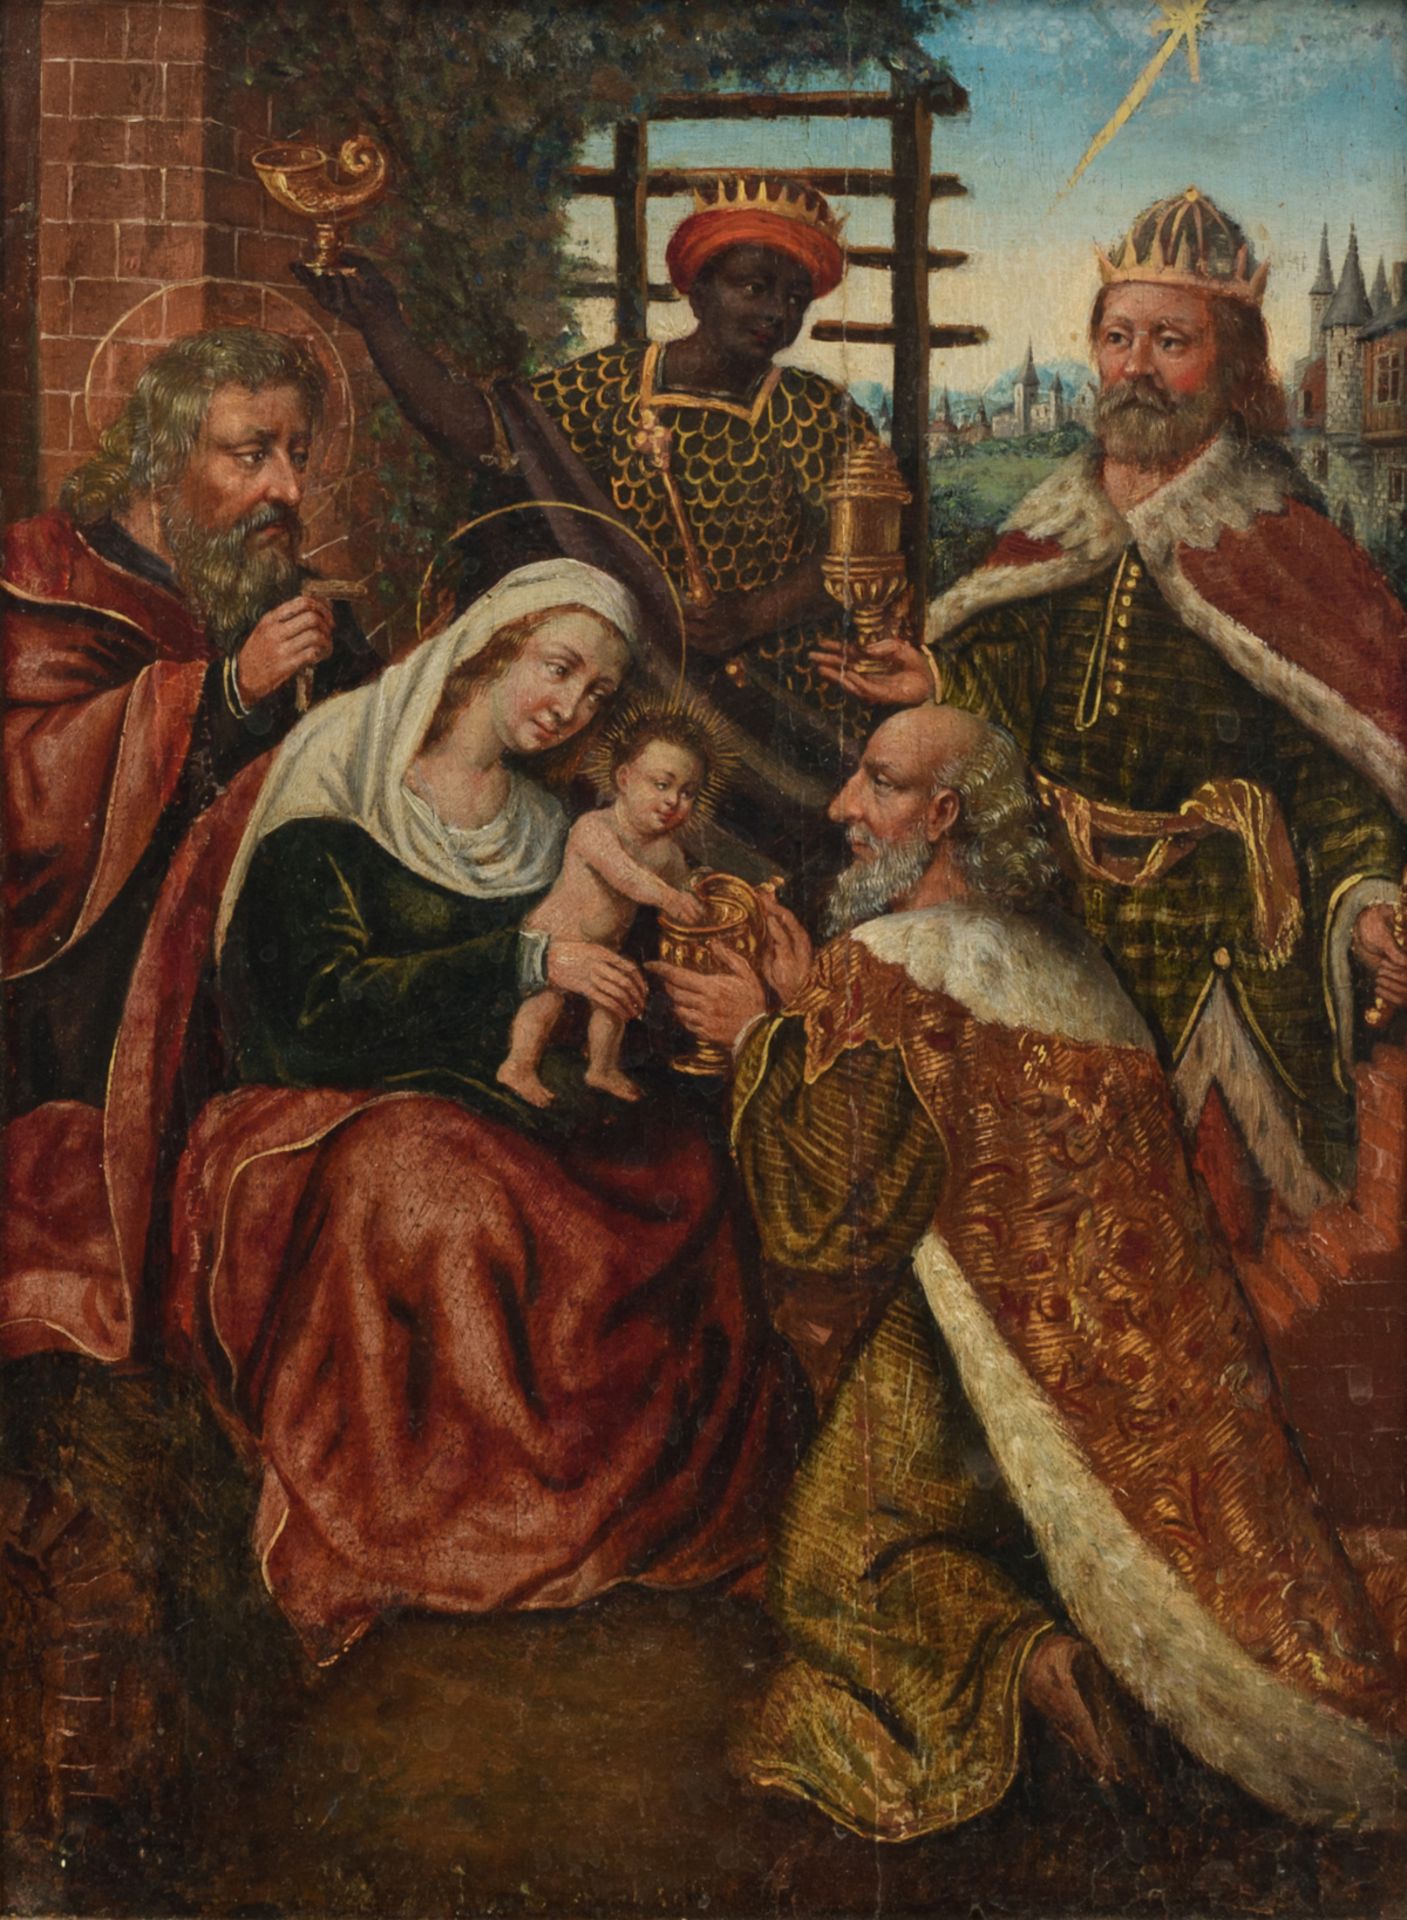 No visible signature, the Adoration of the Magi, the Southern Netherlands, late 16thC, oil on panel,